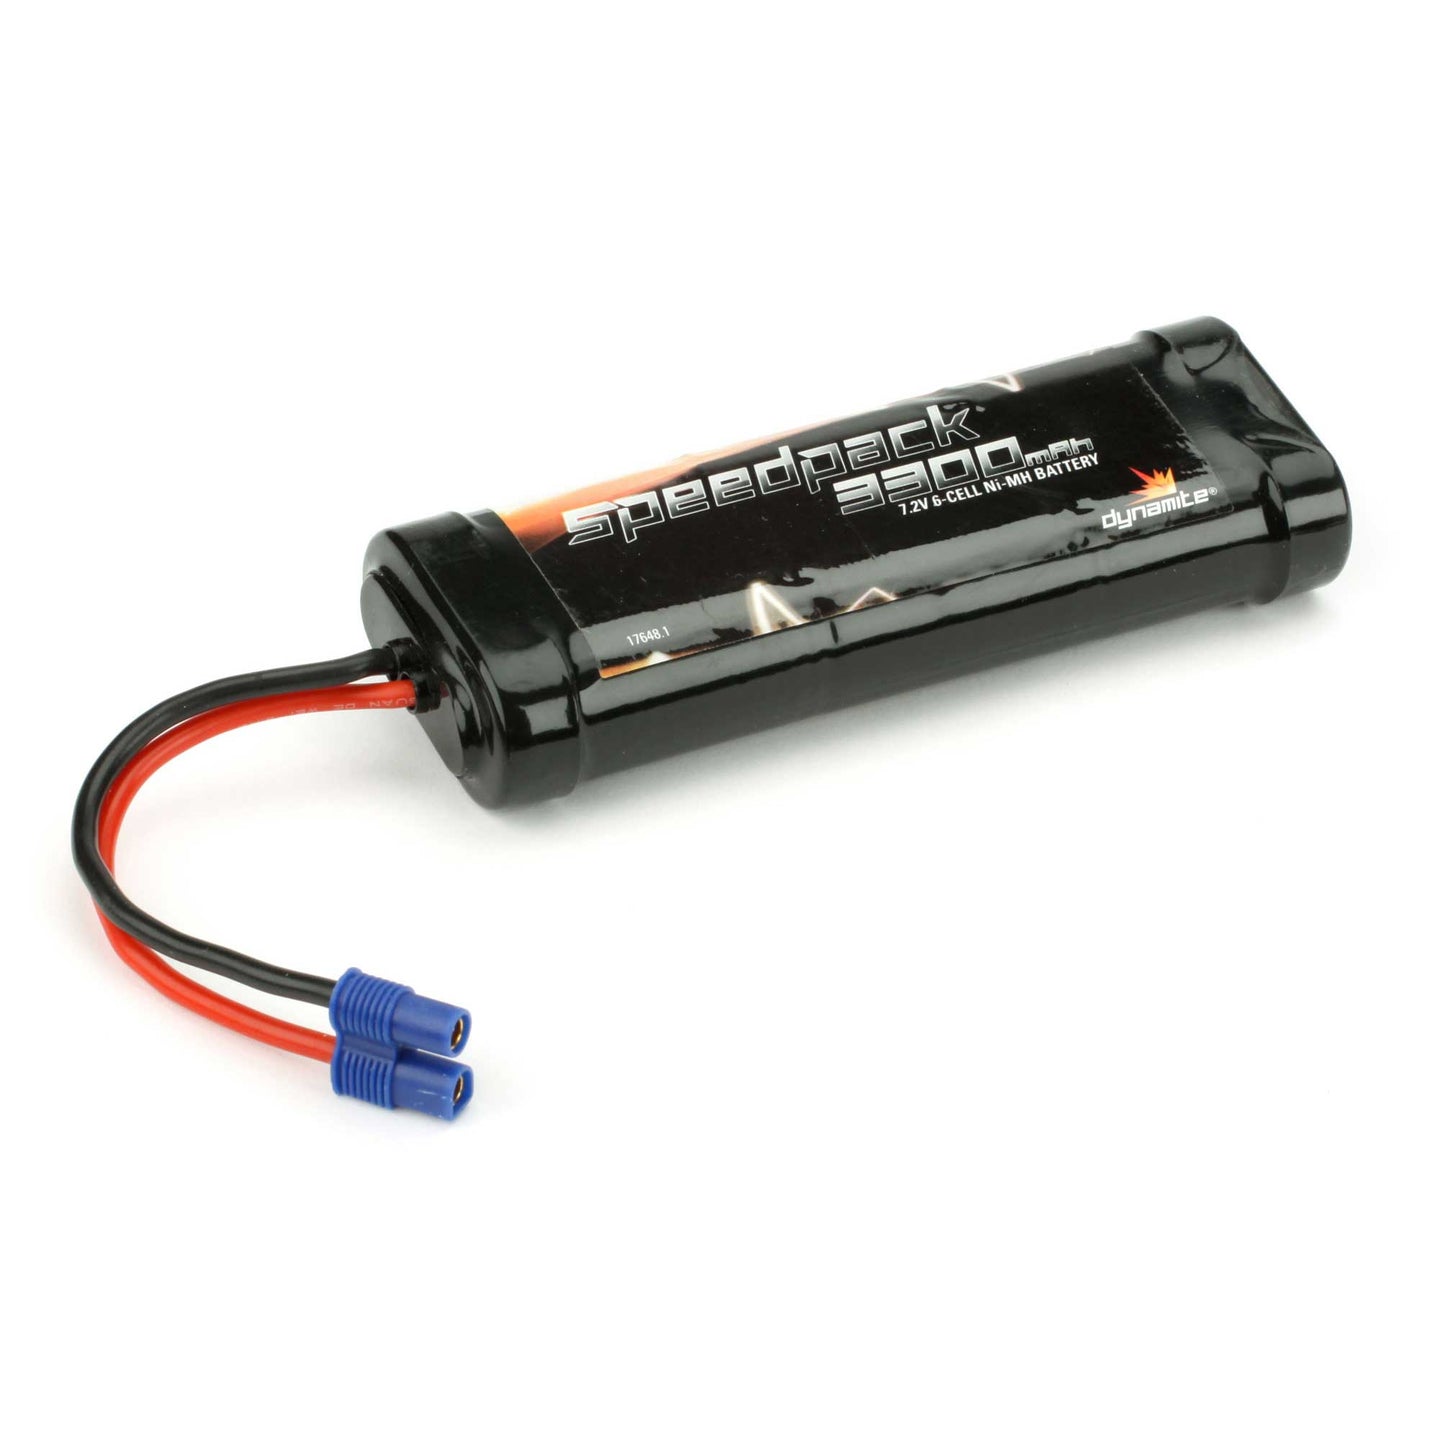 DYN1070EC 3300MAH 6-CELL NIMH WITH EC3 CONNECTION